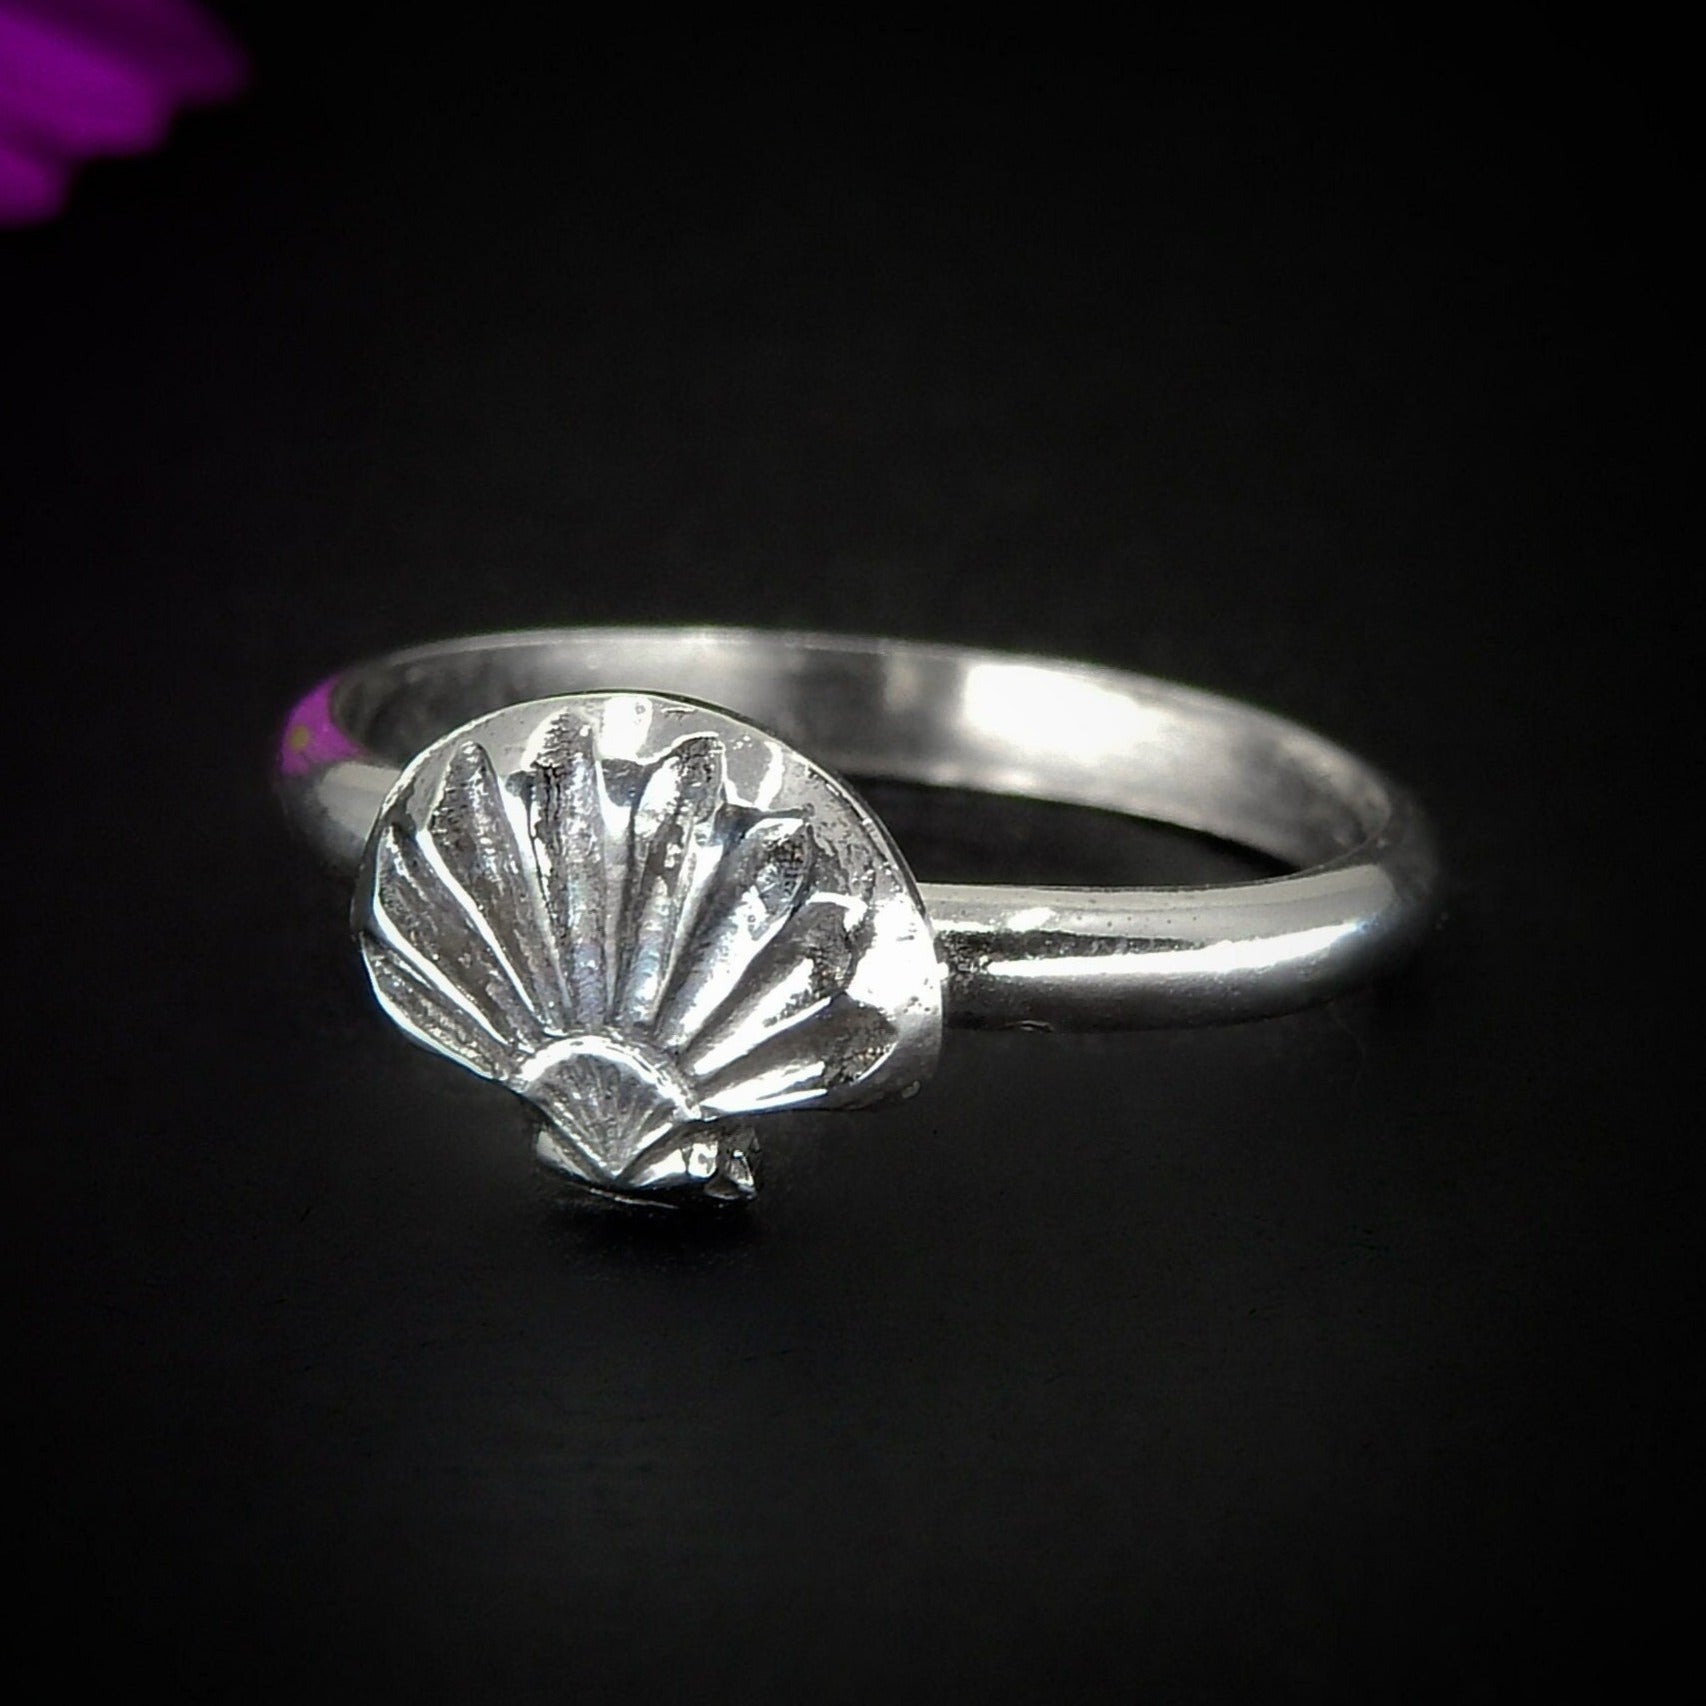 Scallop Shell Ring - Sterling Silver - Made to Order - Fan Shell Ring - Hammered Ocean Jewelry - Handmade Comb Shell Ring - Escallop Ring